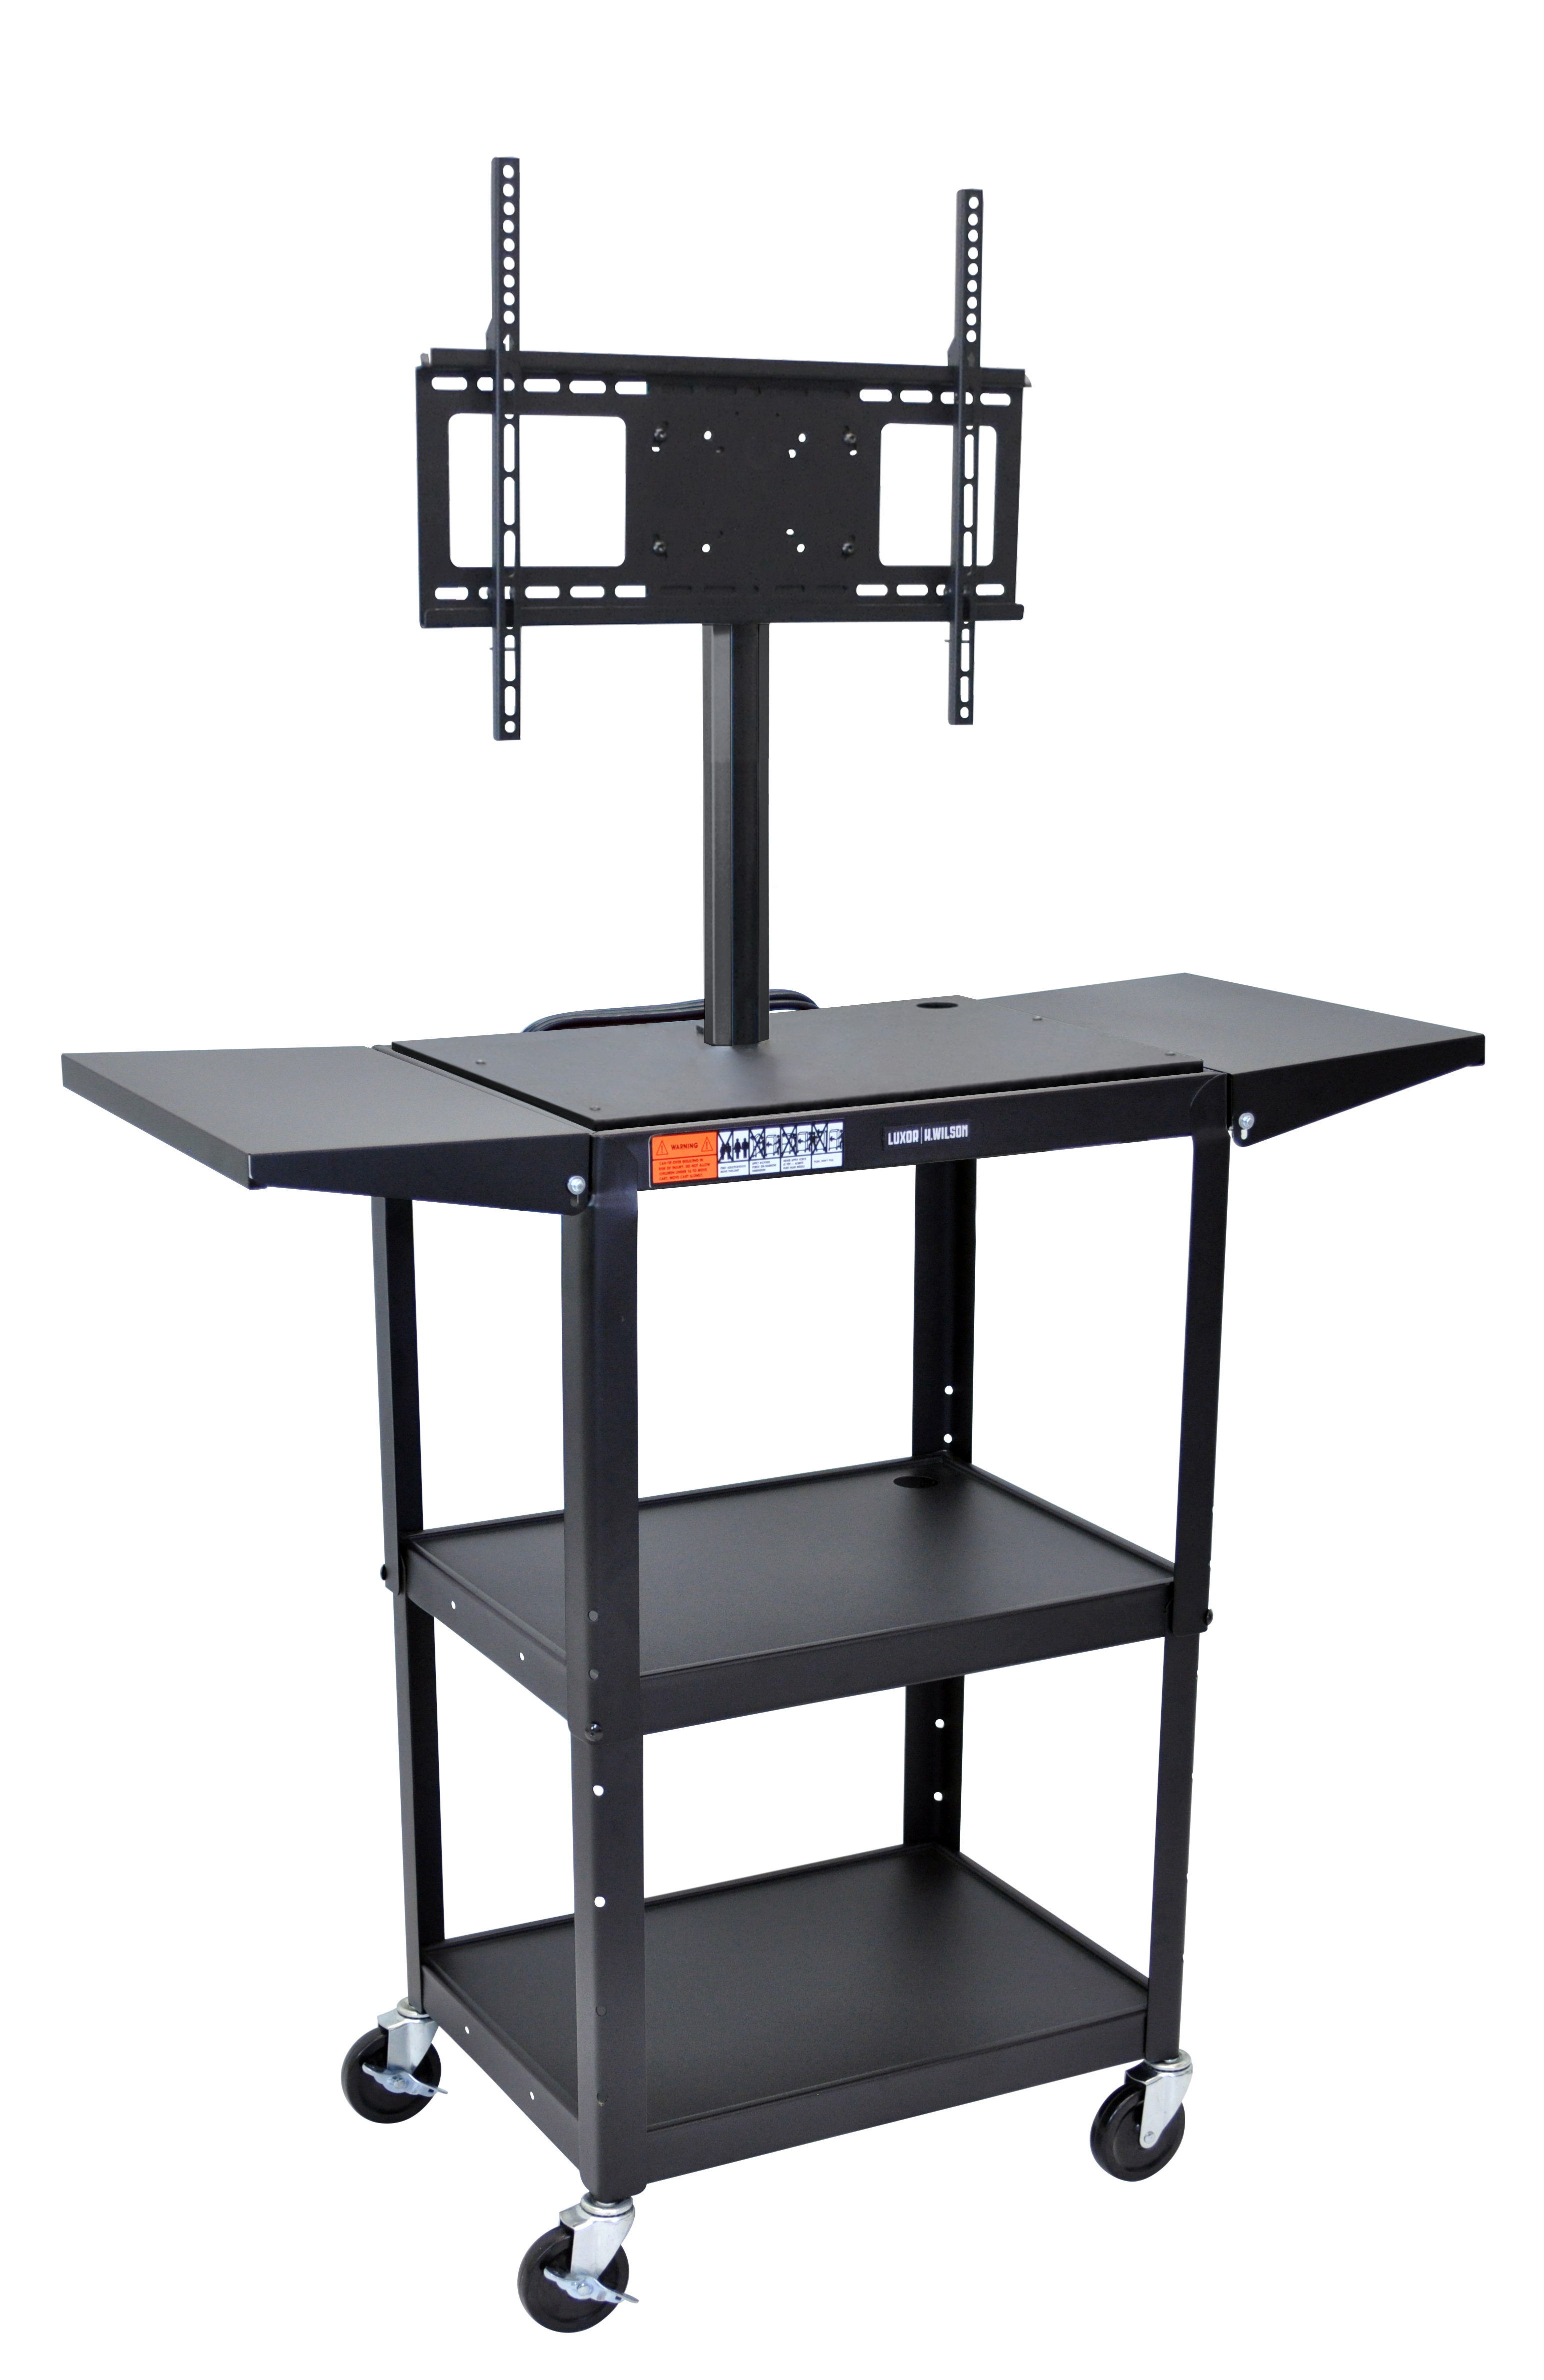 Luxor Adjustable Height Steel Audio Visual Cart with LCD Mount and Drop Leaf - Black